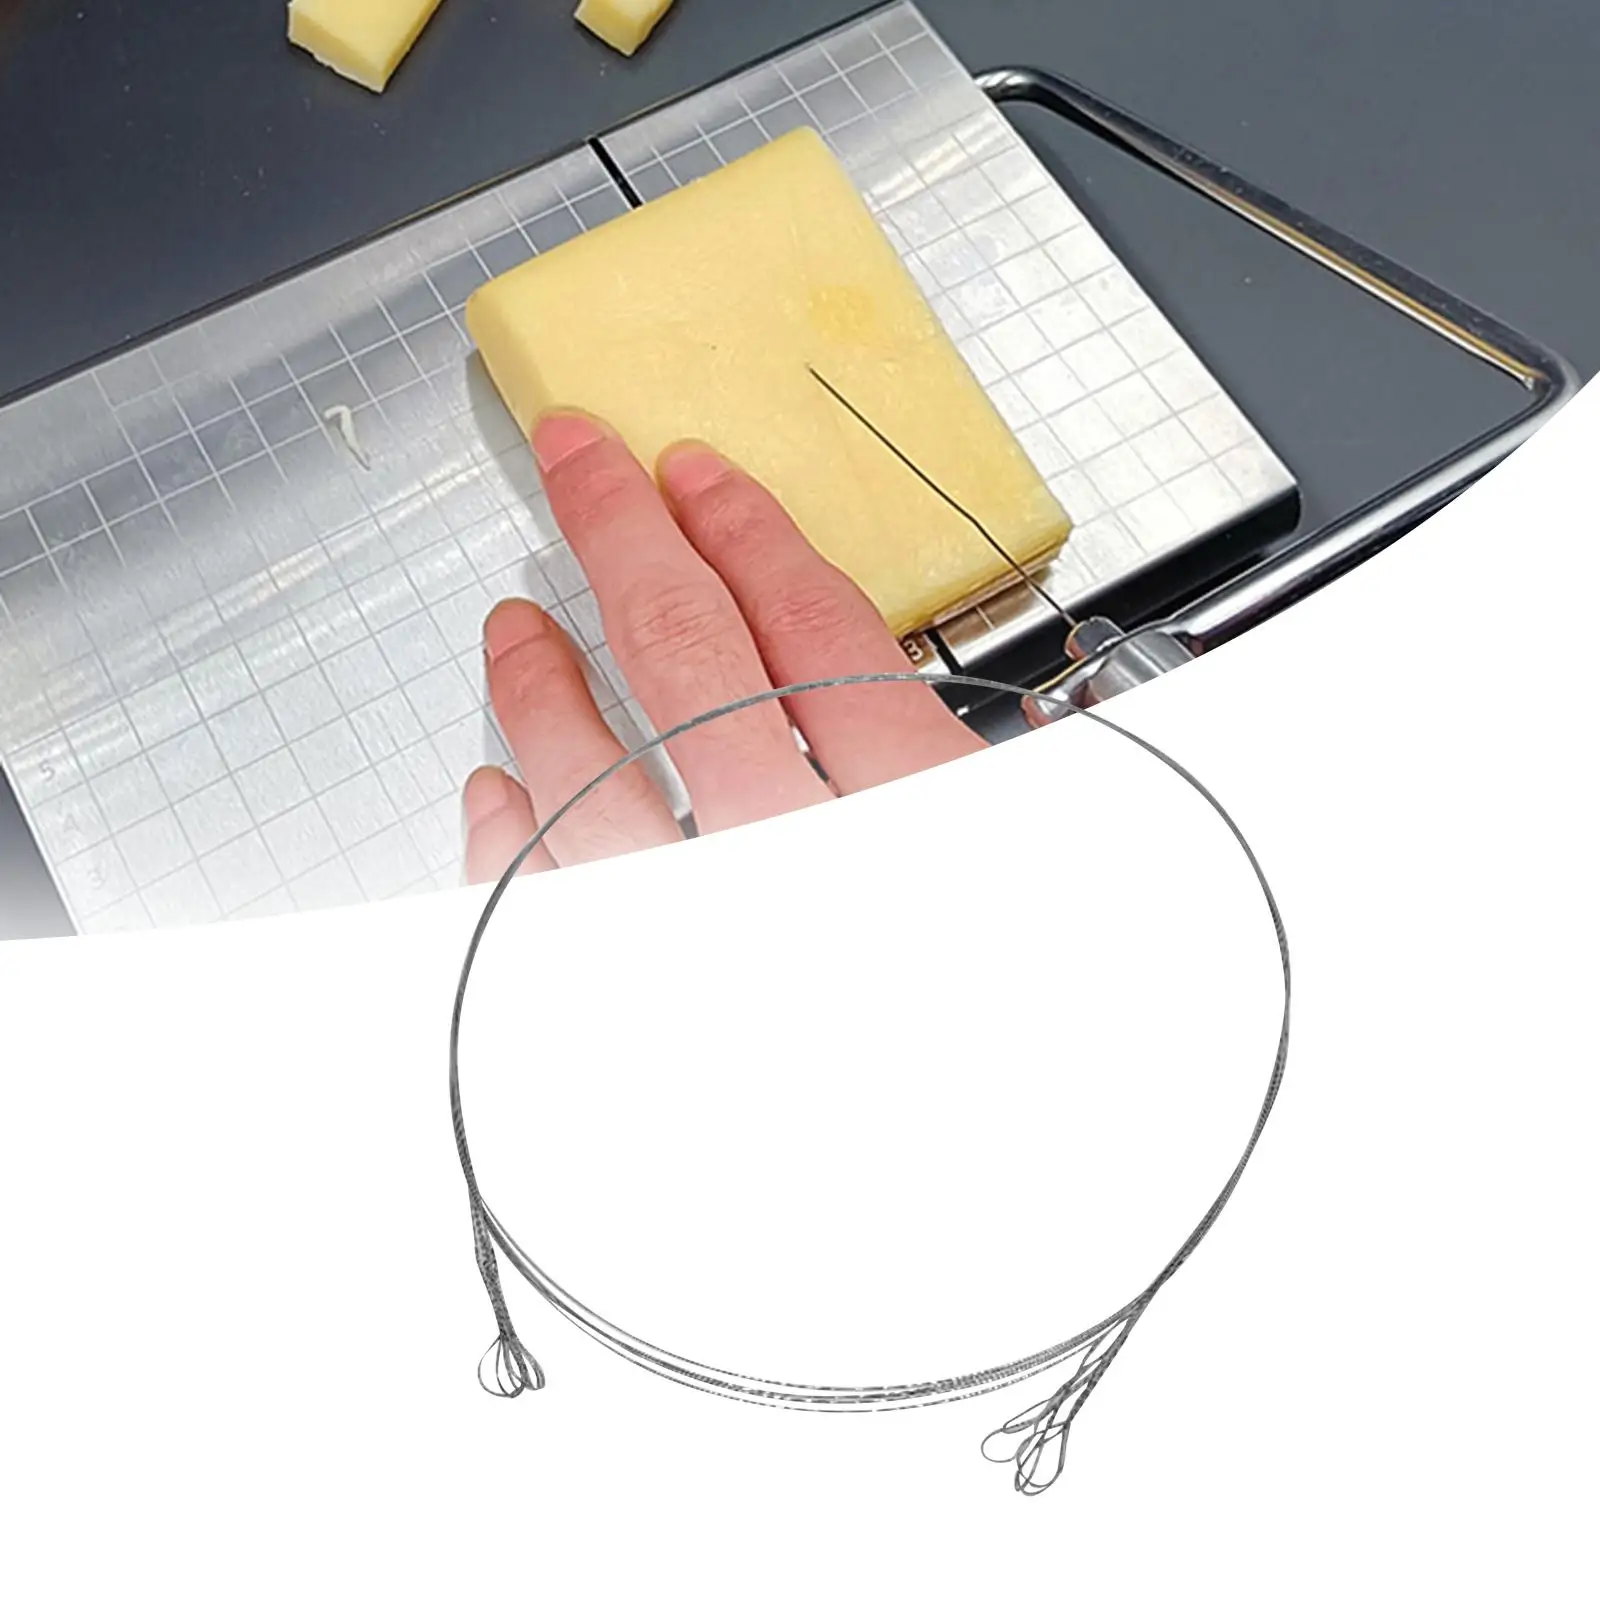 5 Pieces Cheese Cutting Wire 36.22inch Cooking Baking Tool for Baking